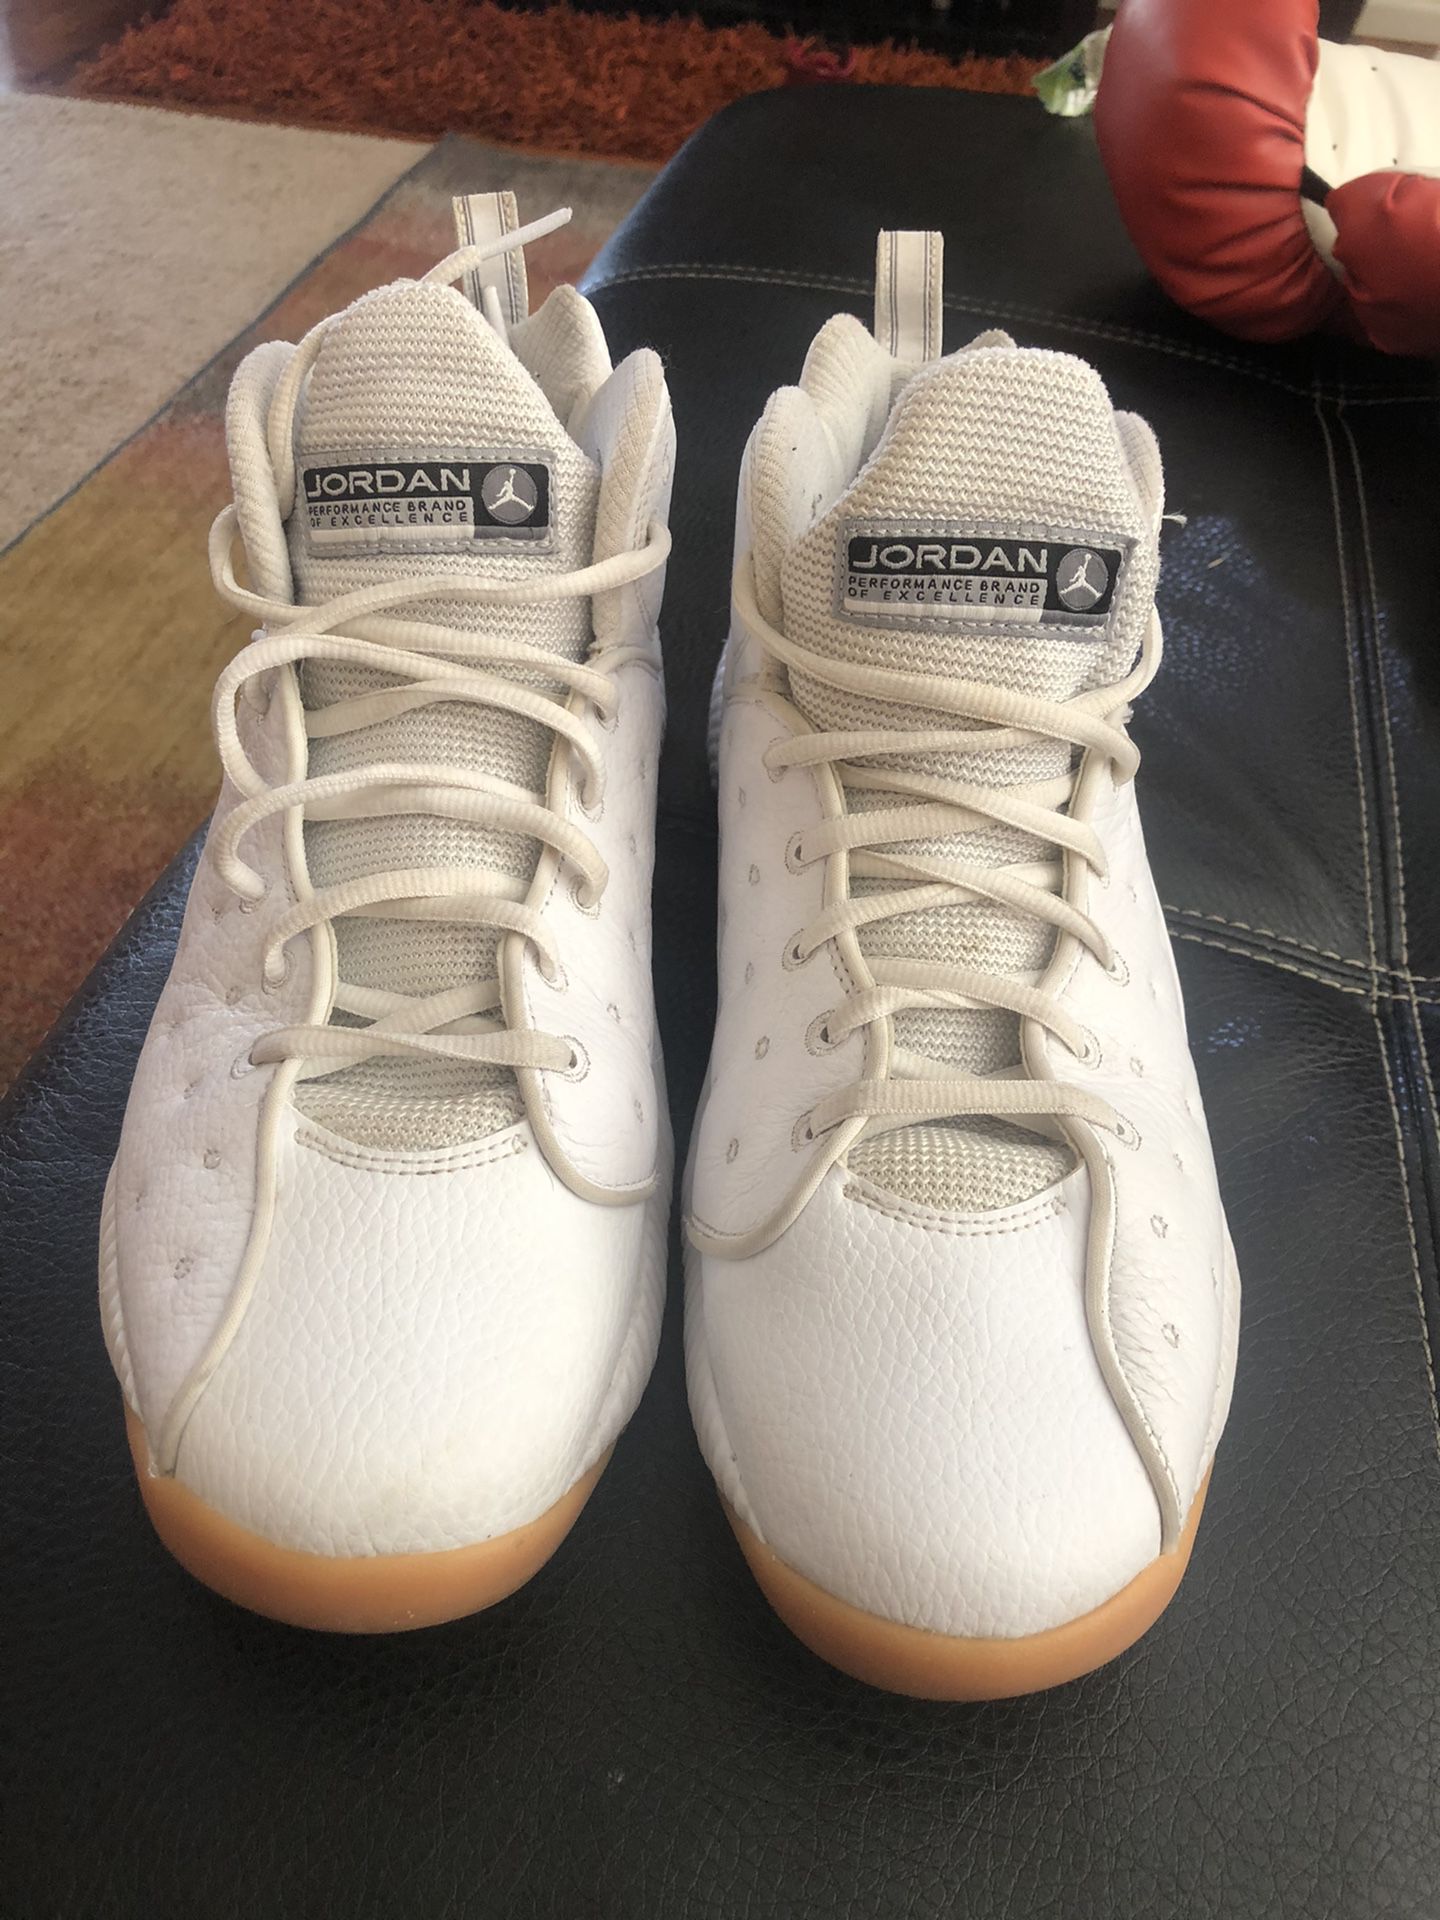 Jordans size 11 ...... 8 out 10 condition.... asking $60 for them